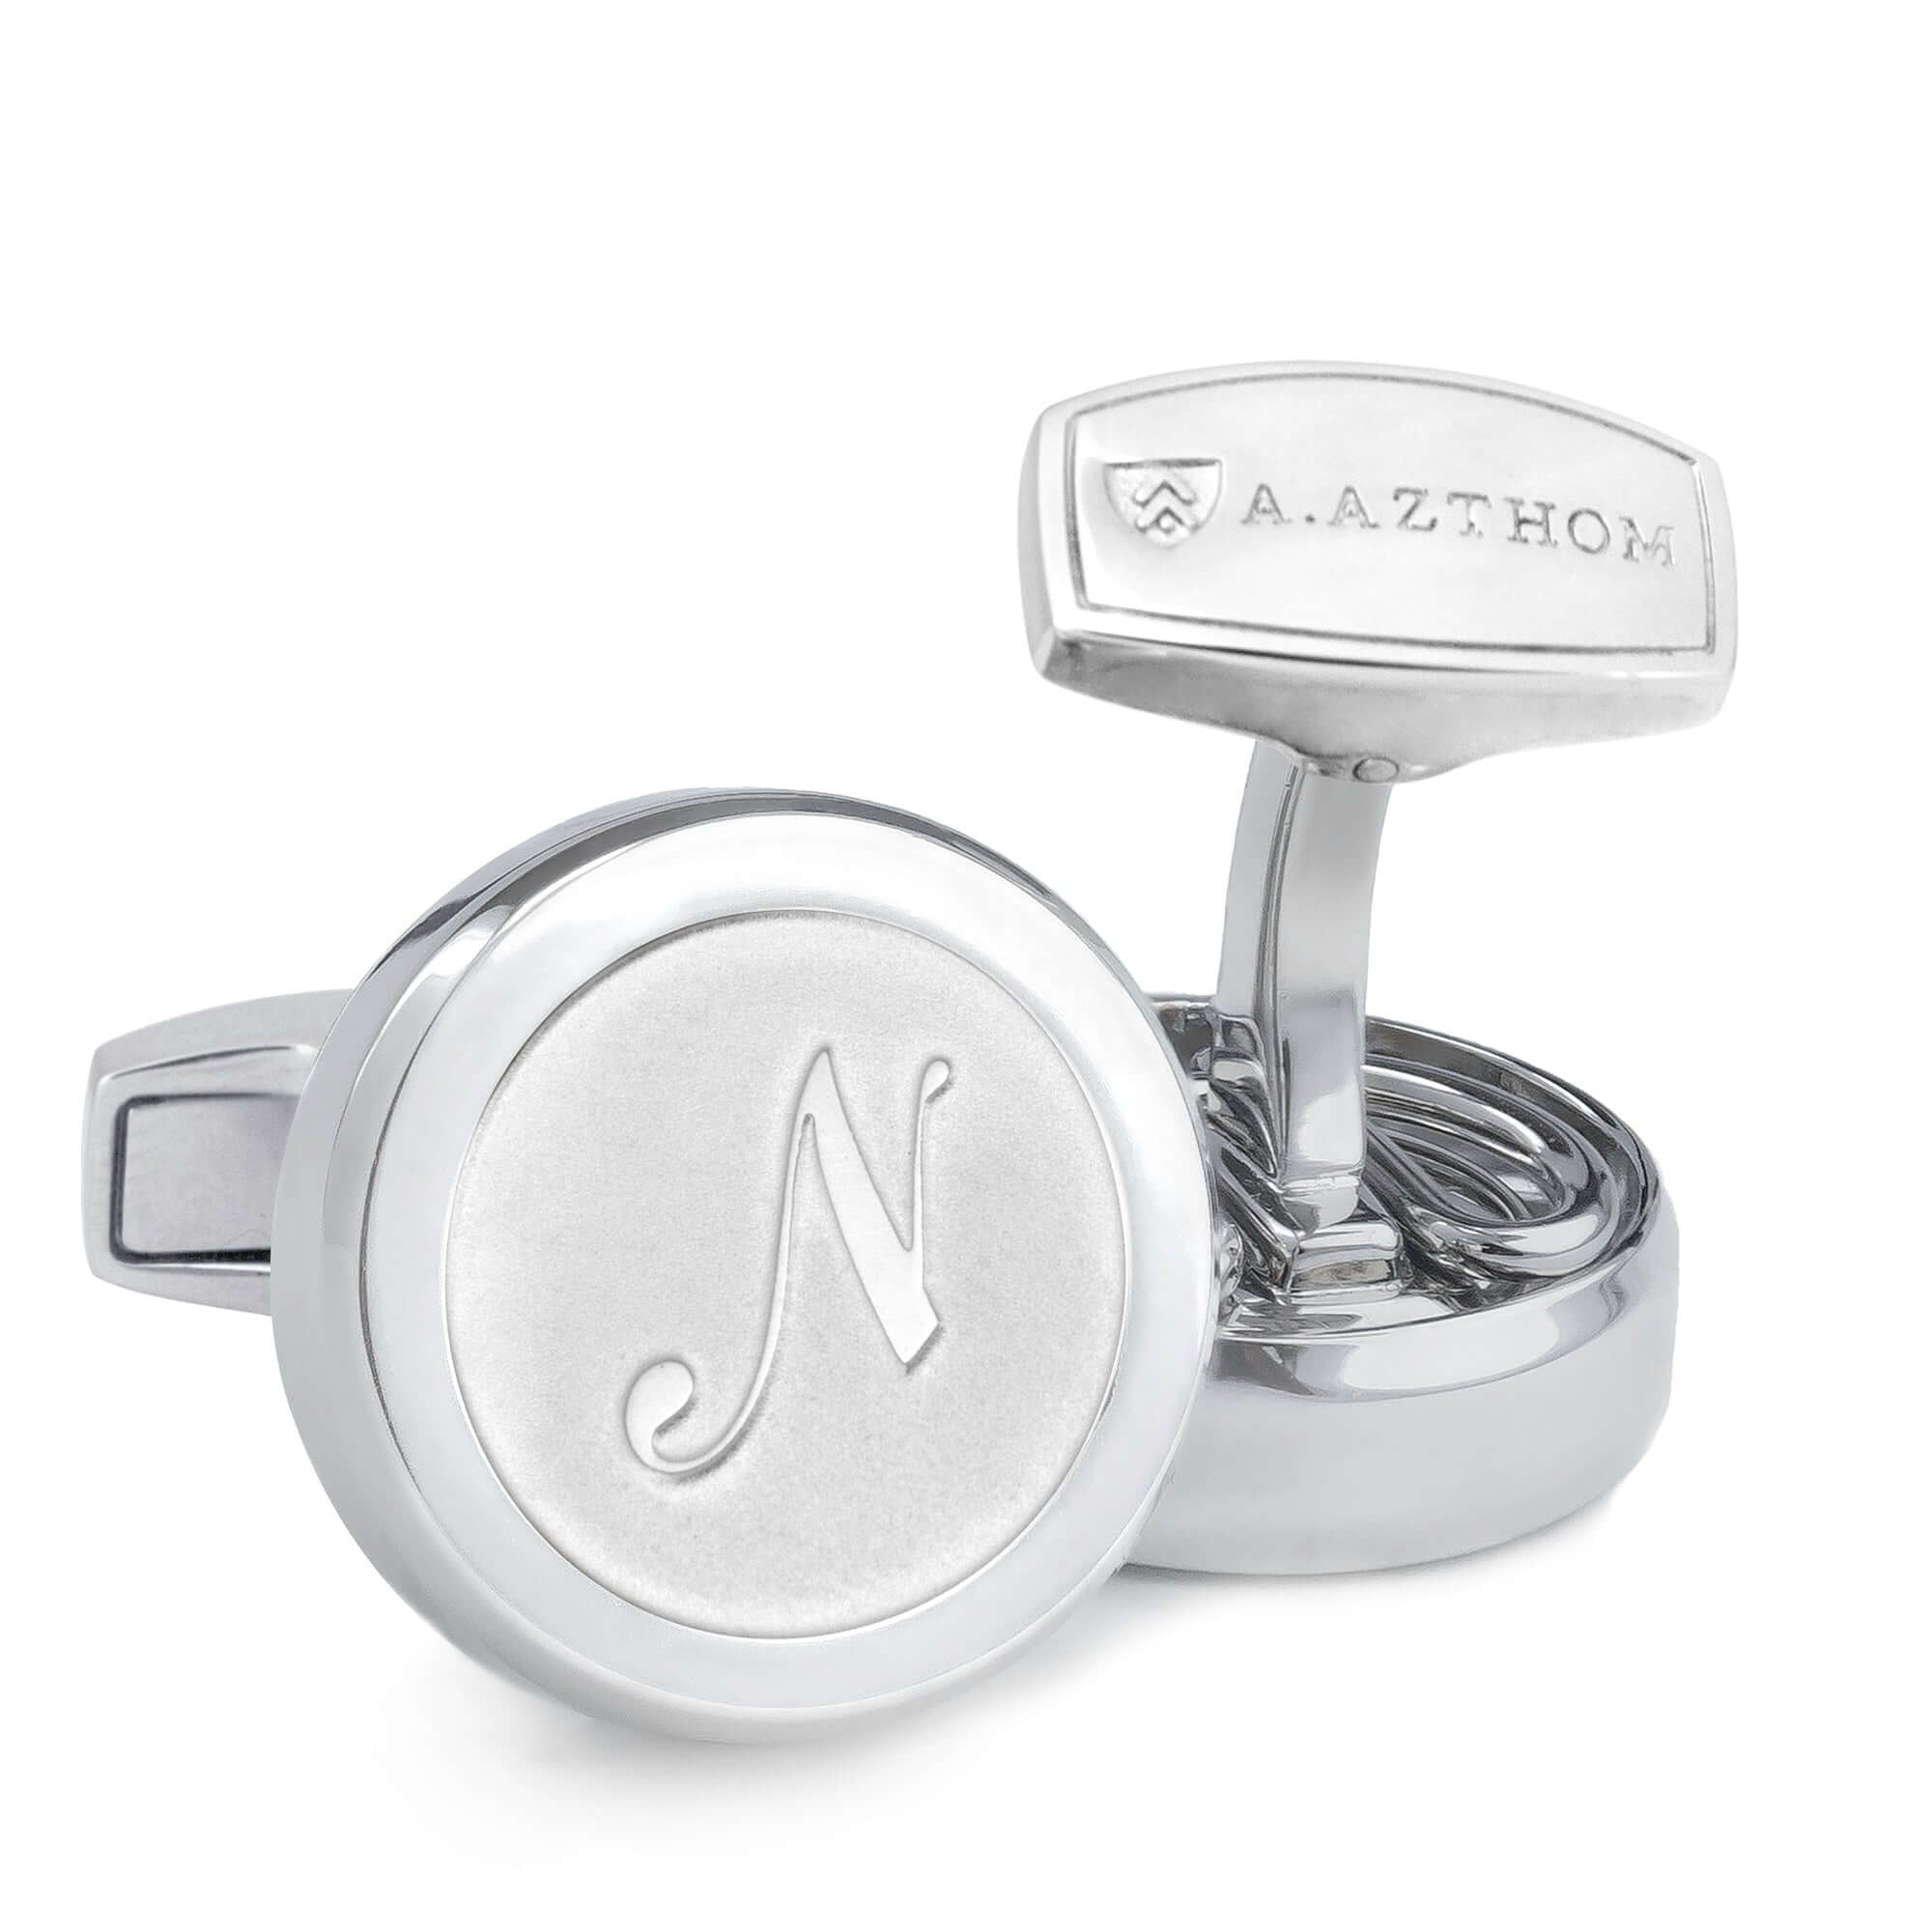 Monogram Etched Silver Cufflinks with Clip-on Button Covers-Cufflinks.com.sg